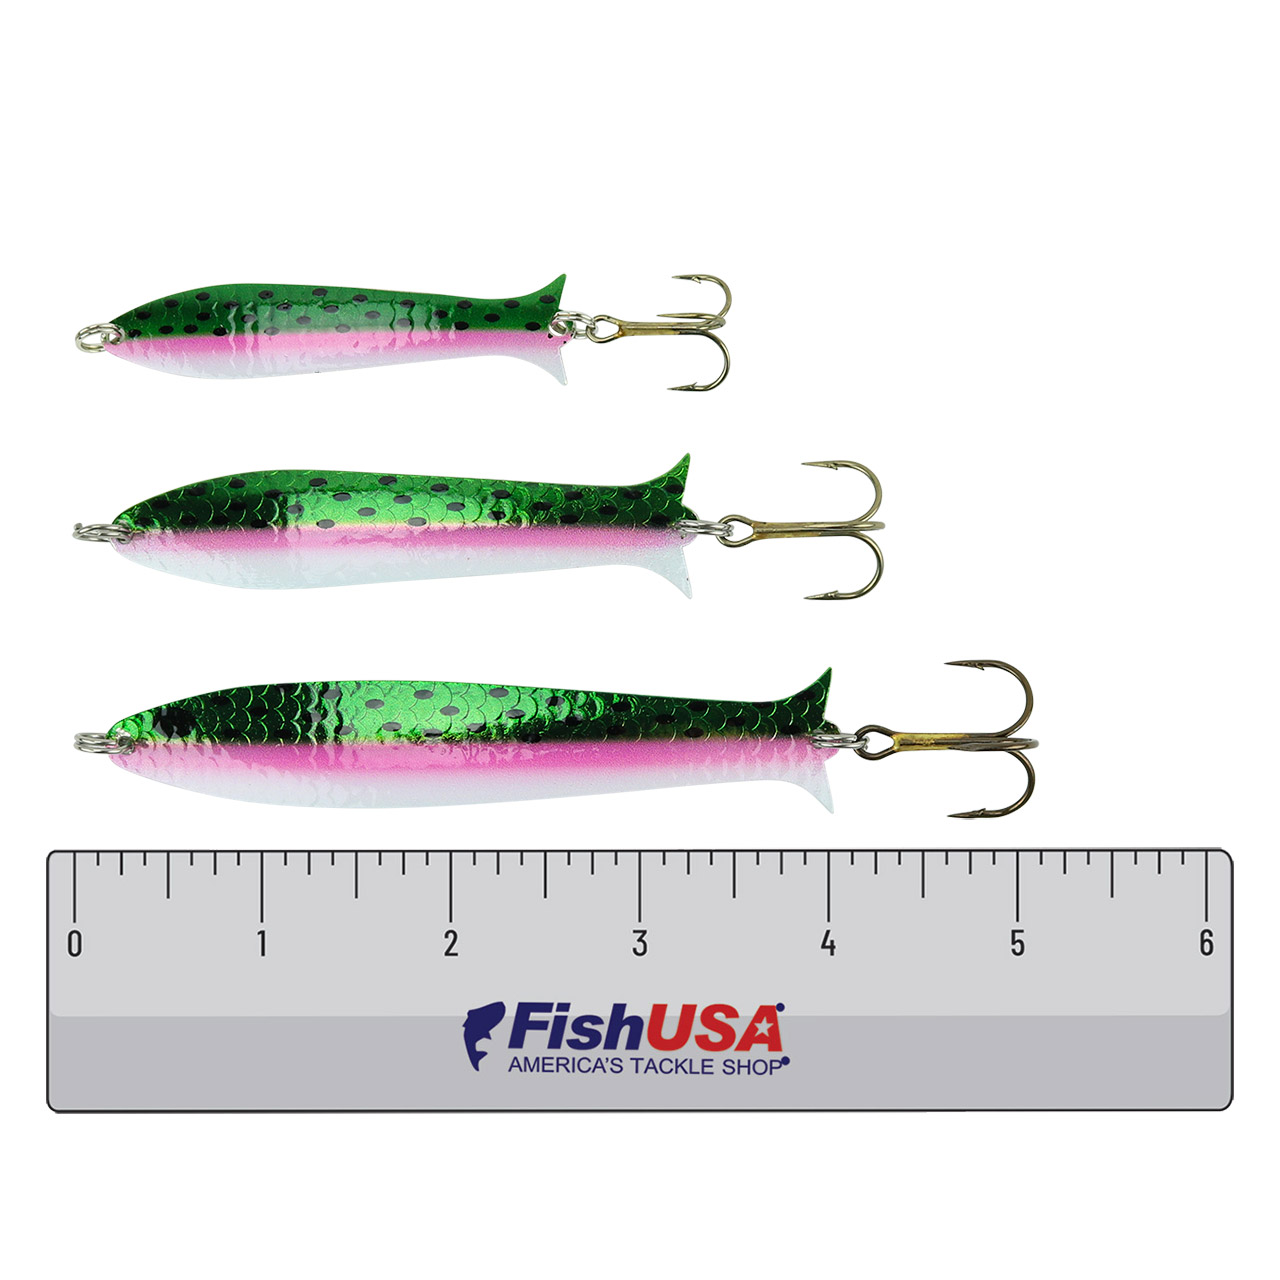 https://cdn11.bigcommerce.com/s-s2ydjd5yv9/images/stencil/original/products/2152/47335/Rainbow_Trout_ruler__18383.1708532940.jpg?c=1